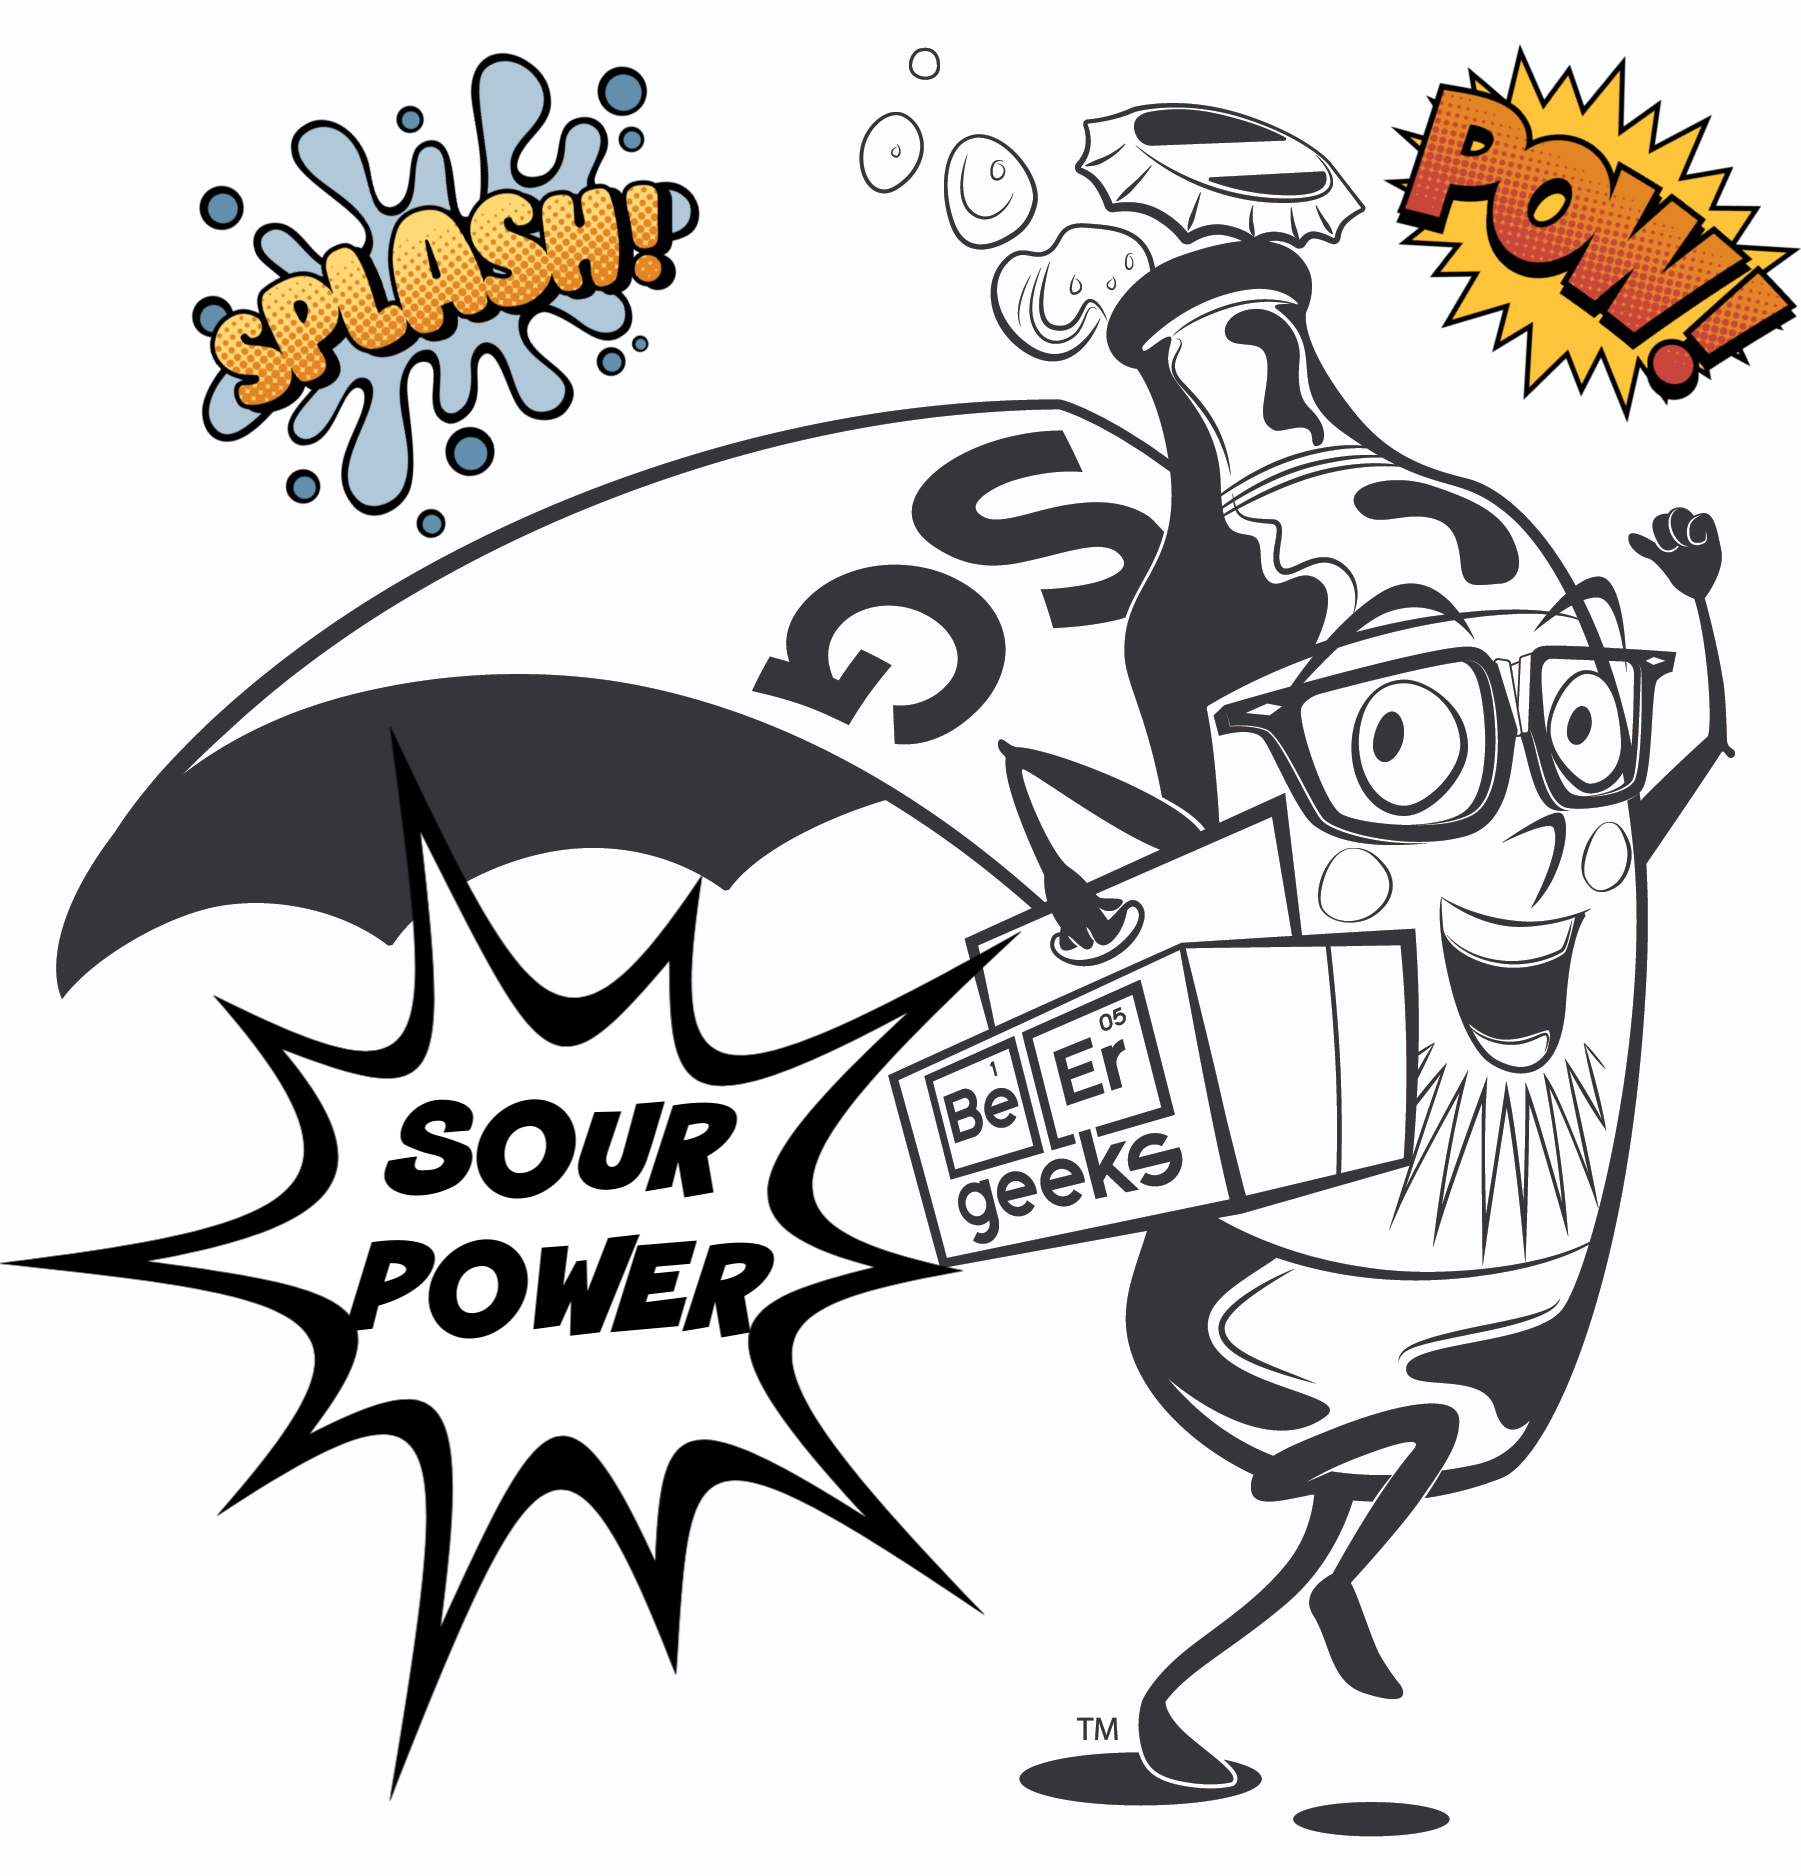 Calling All Super Beer Geeks, Break Out Your Sour Power!